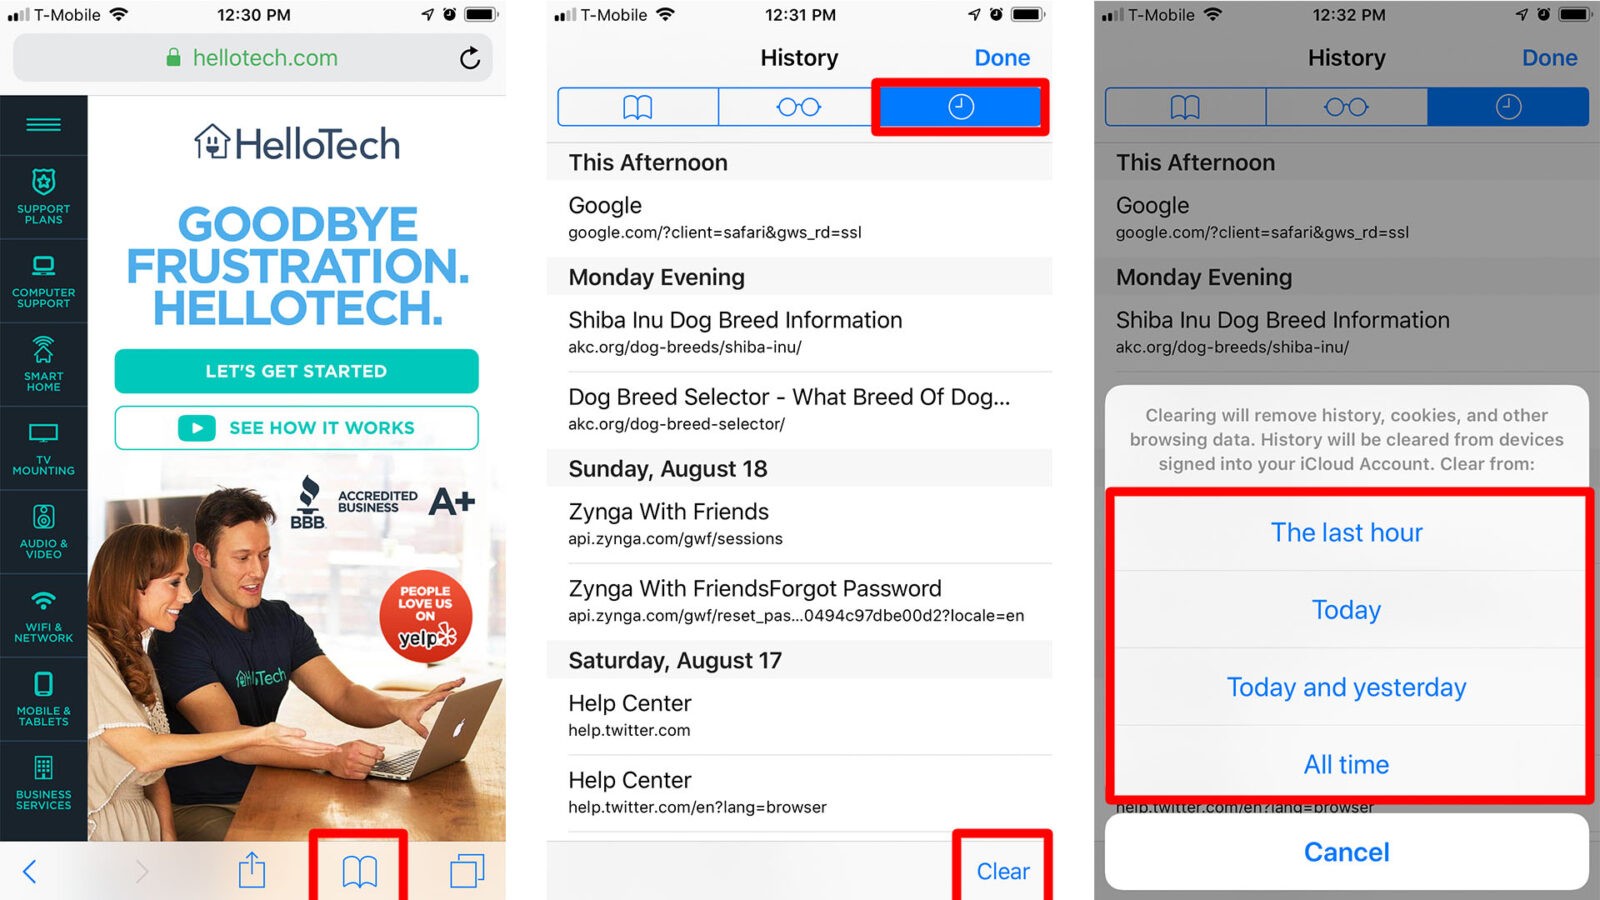 How to Clear History Based on Time Periods on Safari